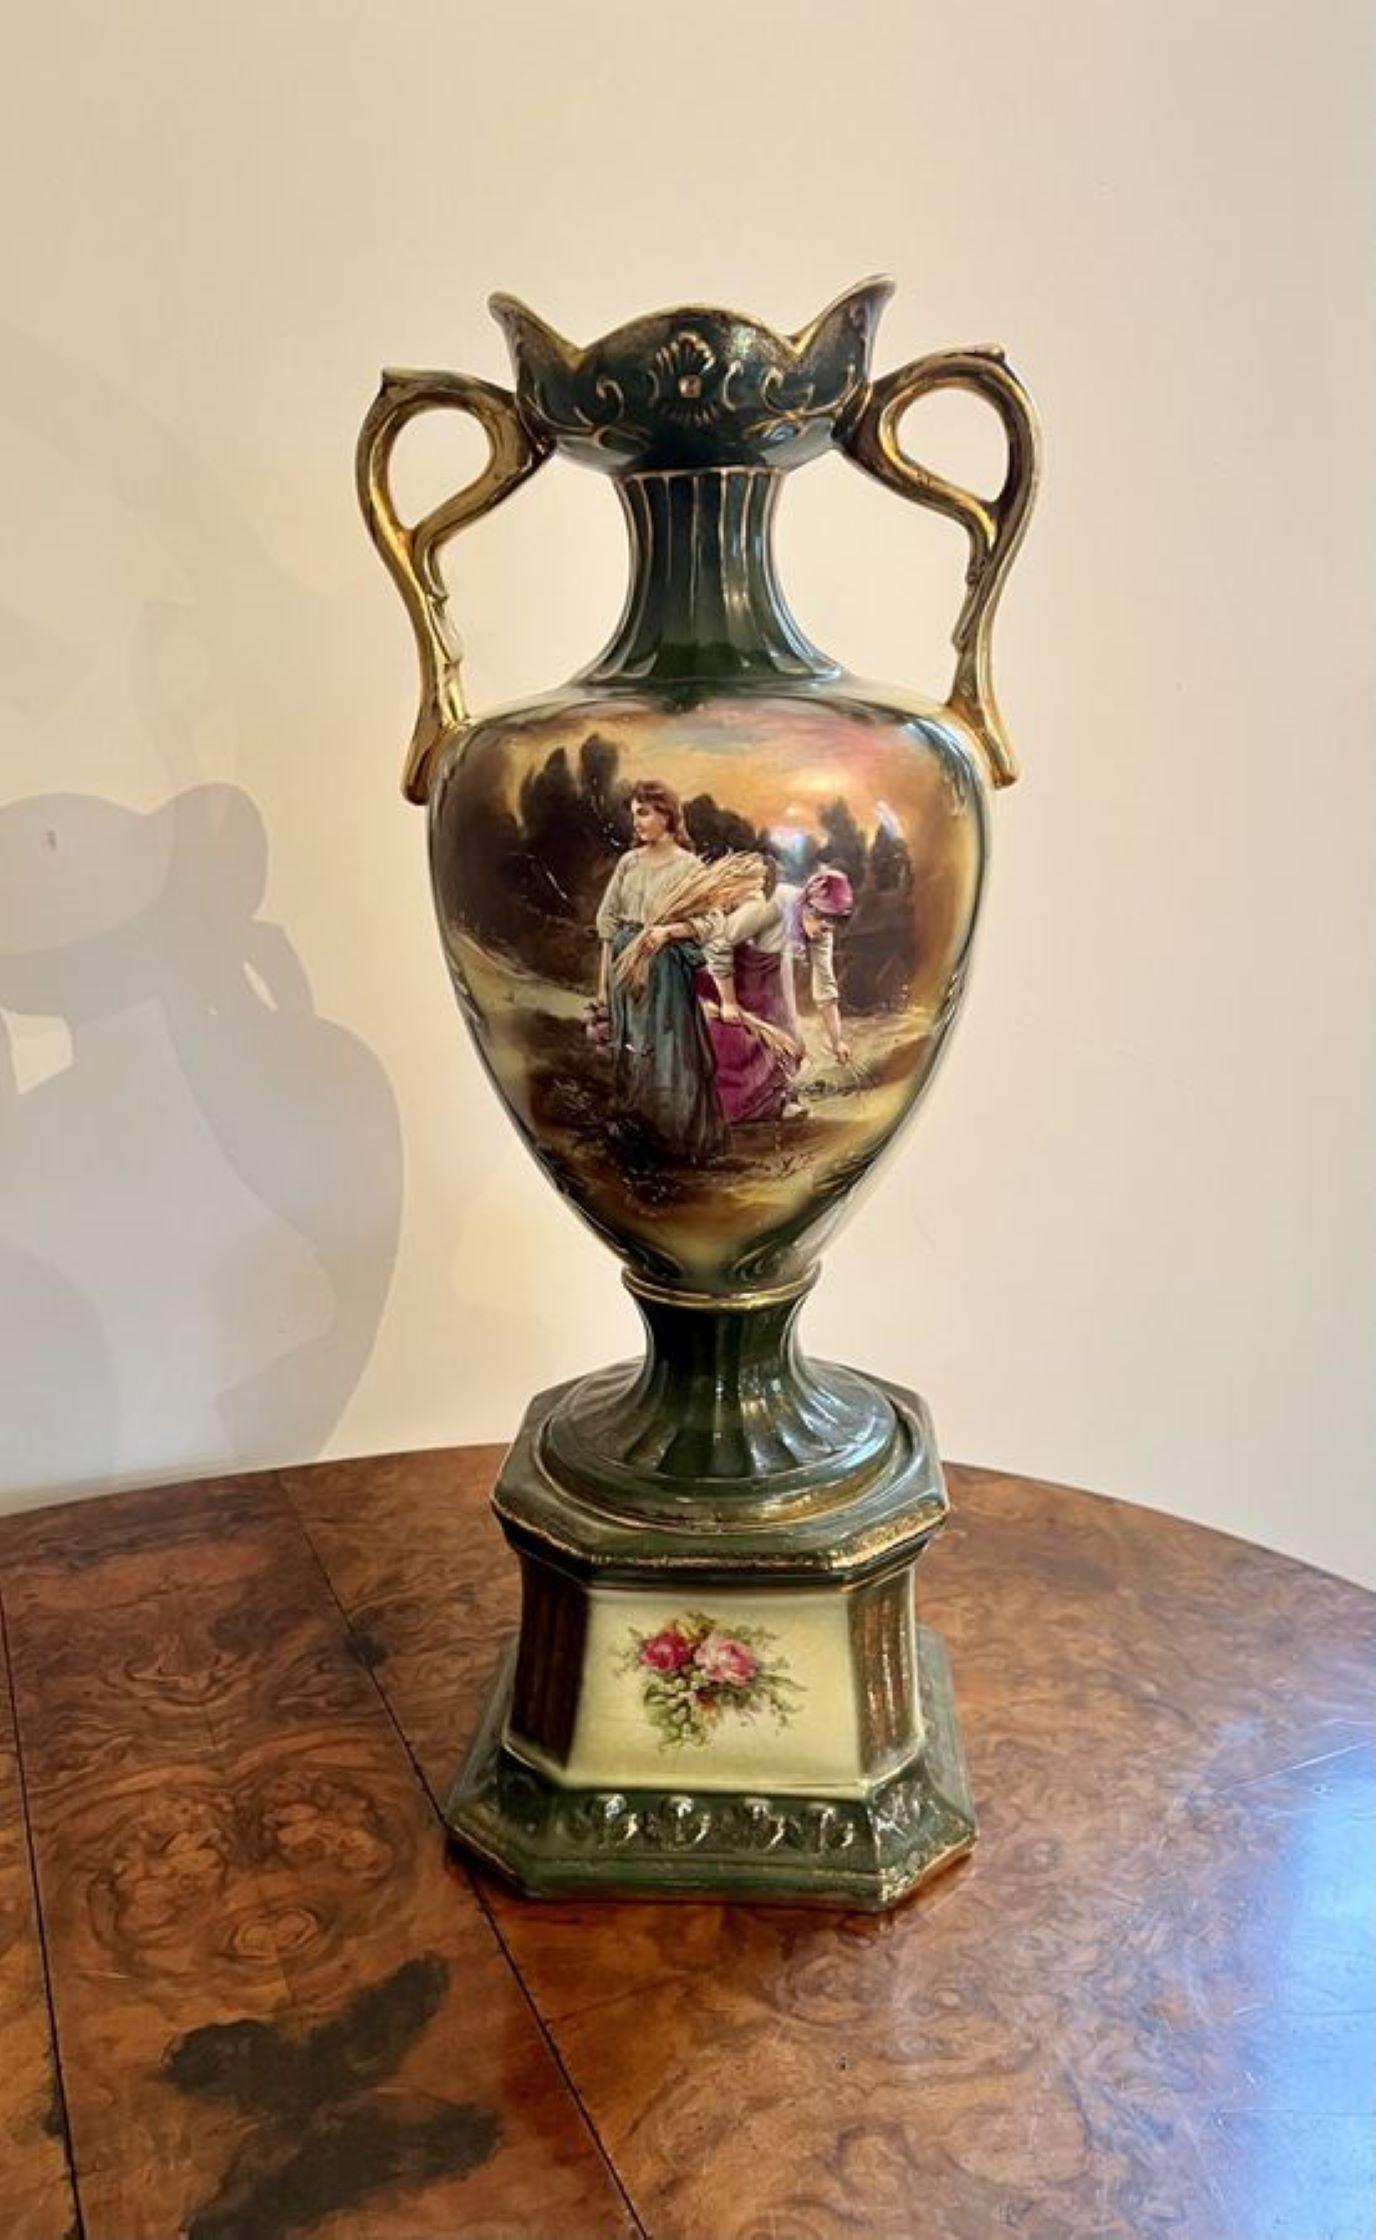 Stunning pair of large antique Victorian vases having a quality pair of antique Victorian vases, with a green ground decorated with beautiful flowers on one side and a figural scene to the other side, hand painted in stunning pink, yellow, green,